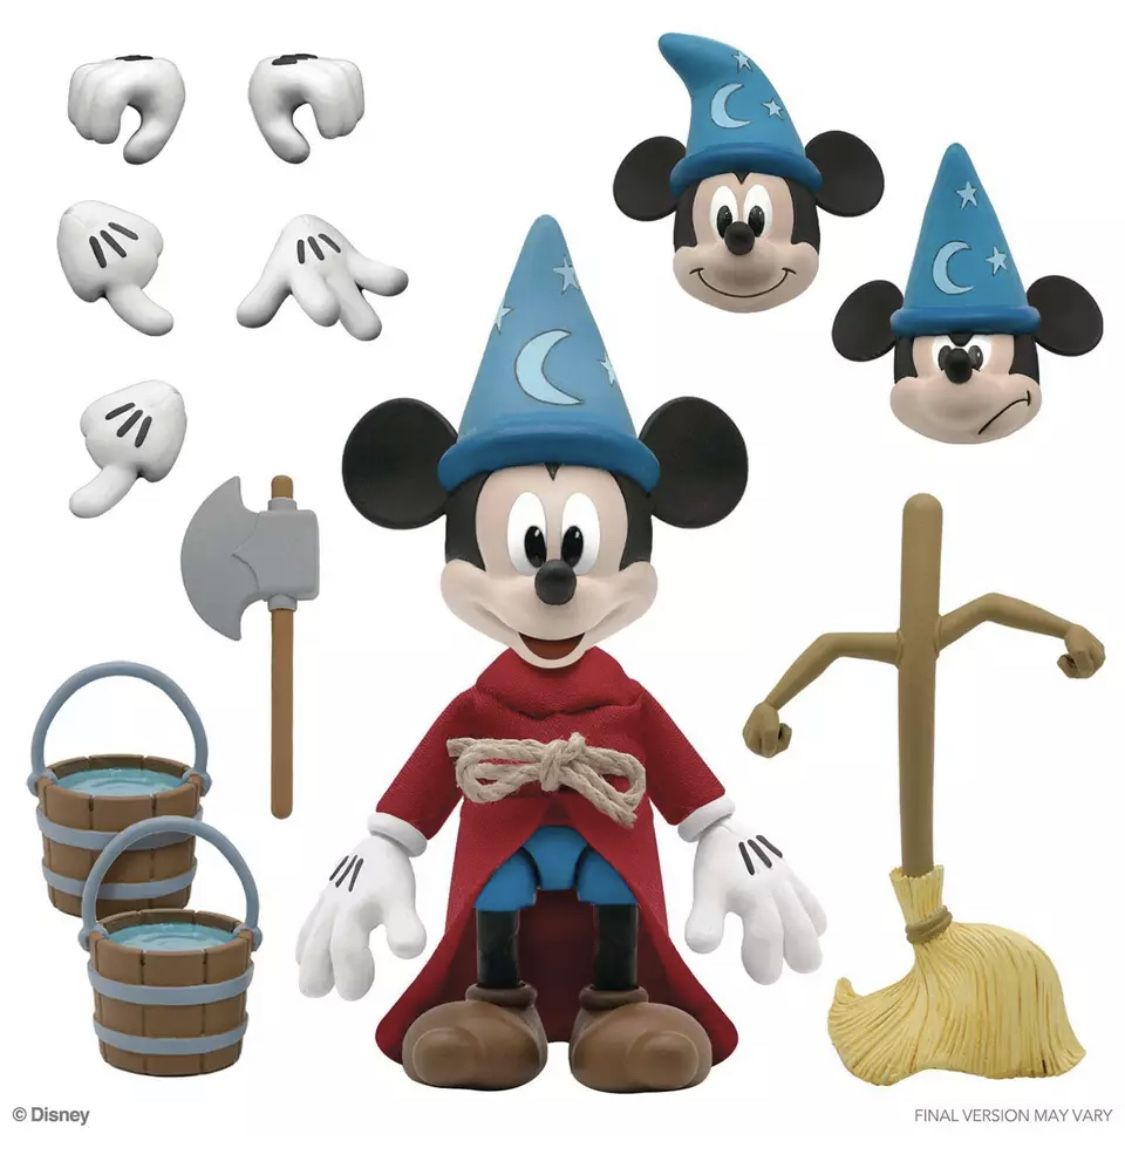 In Hand, Brand New, Never Opened Super7 Disney Ultimates Fantasia Sorceror's Apprentice Mickey Mouse Action Figure